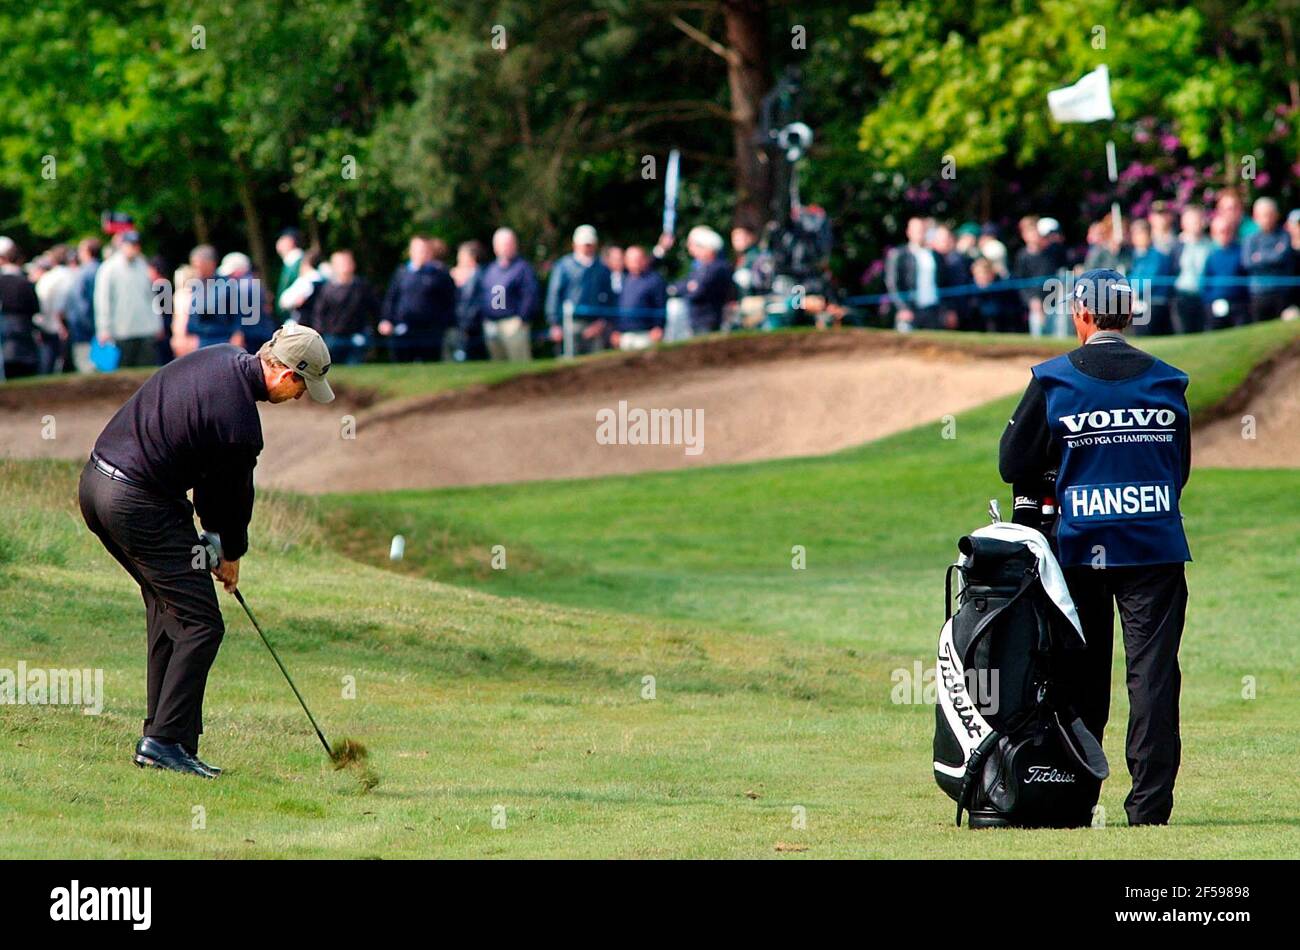 VOLVO PGA CHAMPIONSHIP AT WENTWORTH 25/5/2002 HANSEN 2ND TO THE 11TH PICTURE DAVID ASHDOWN.GOLF Stock Photo